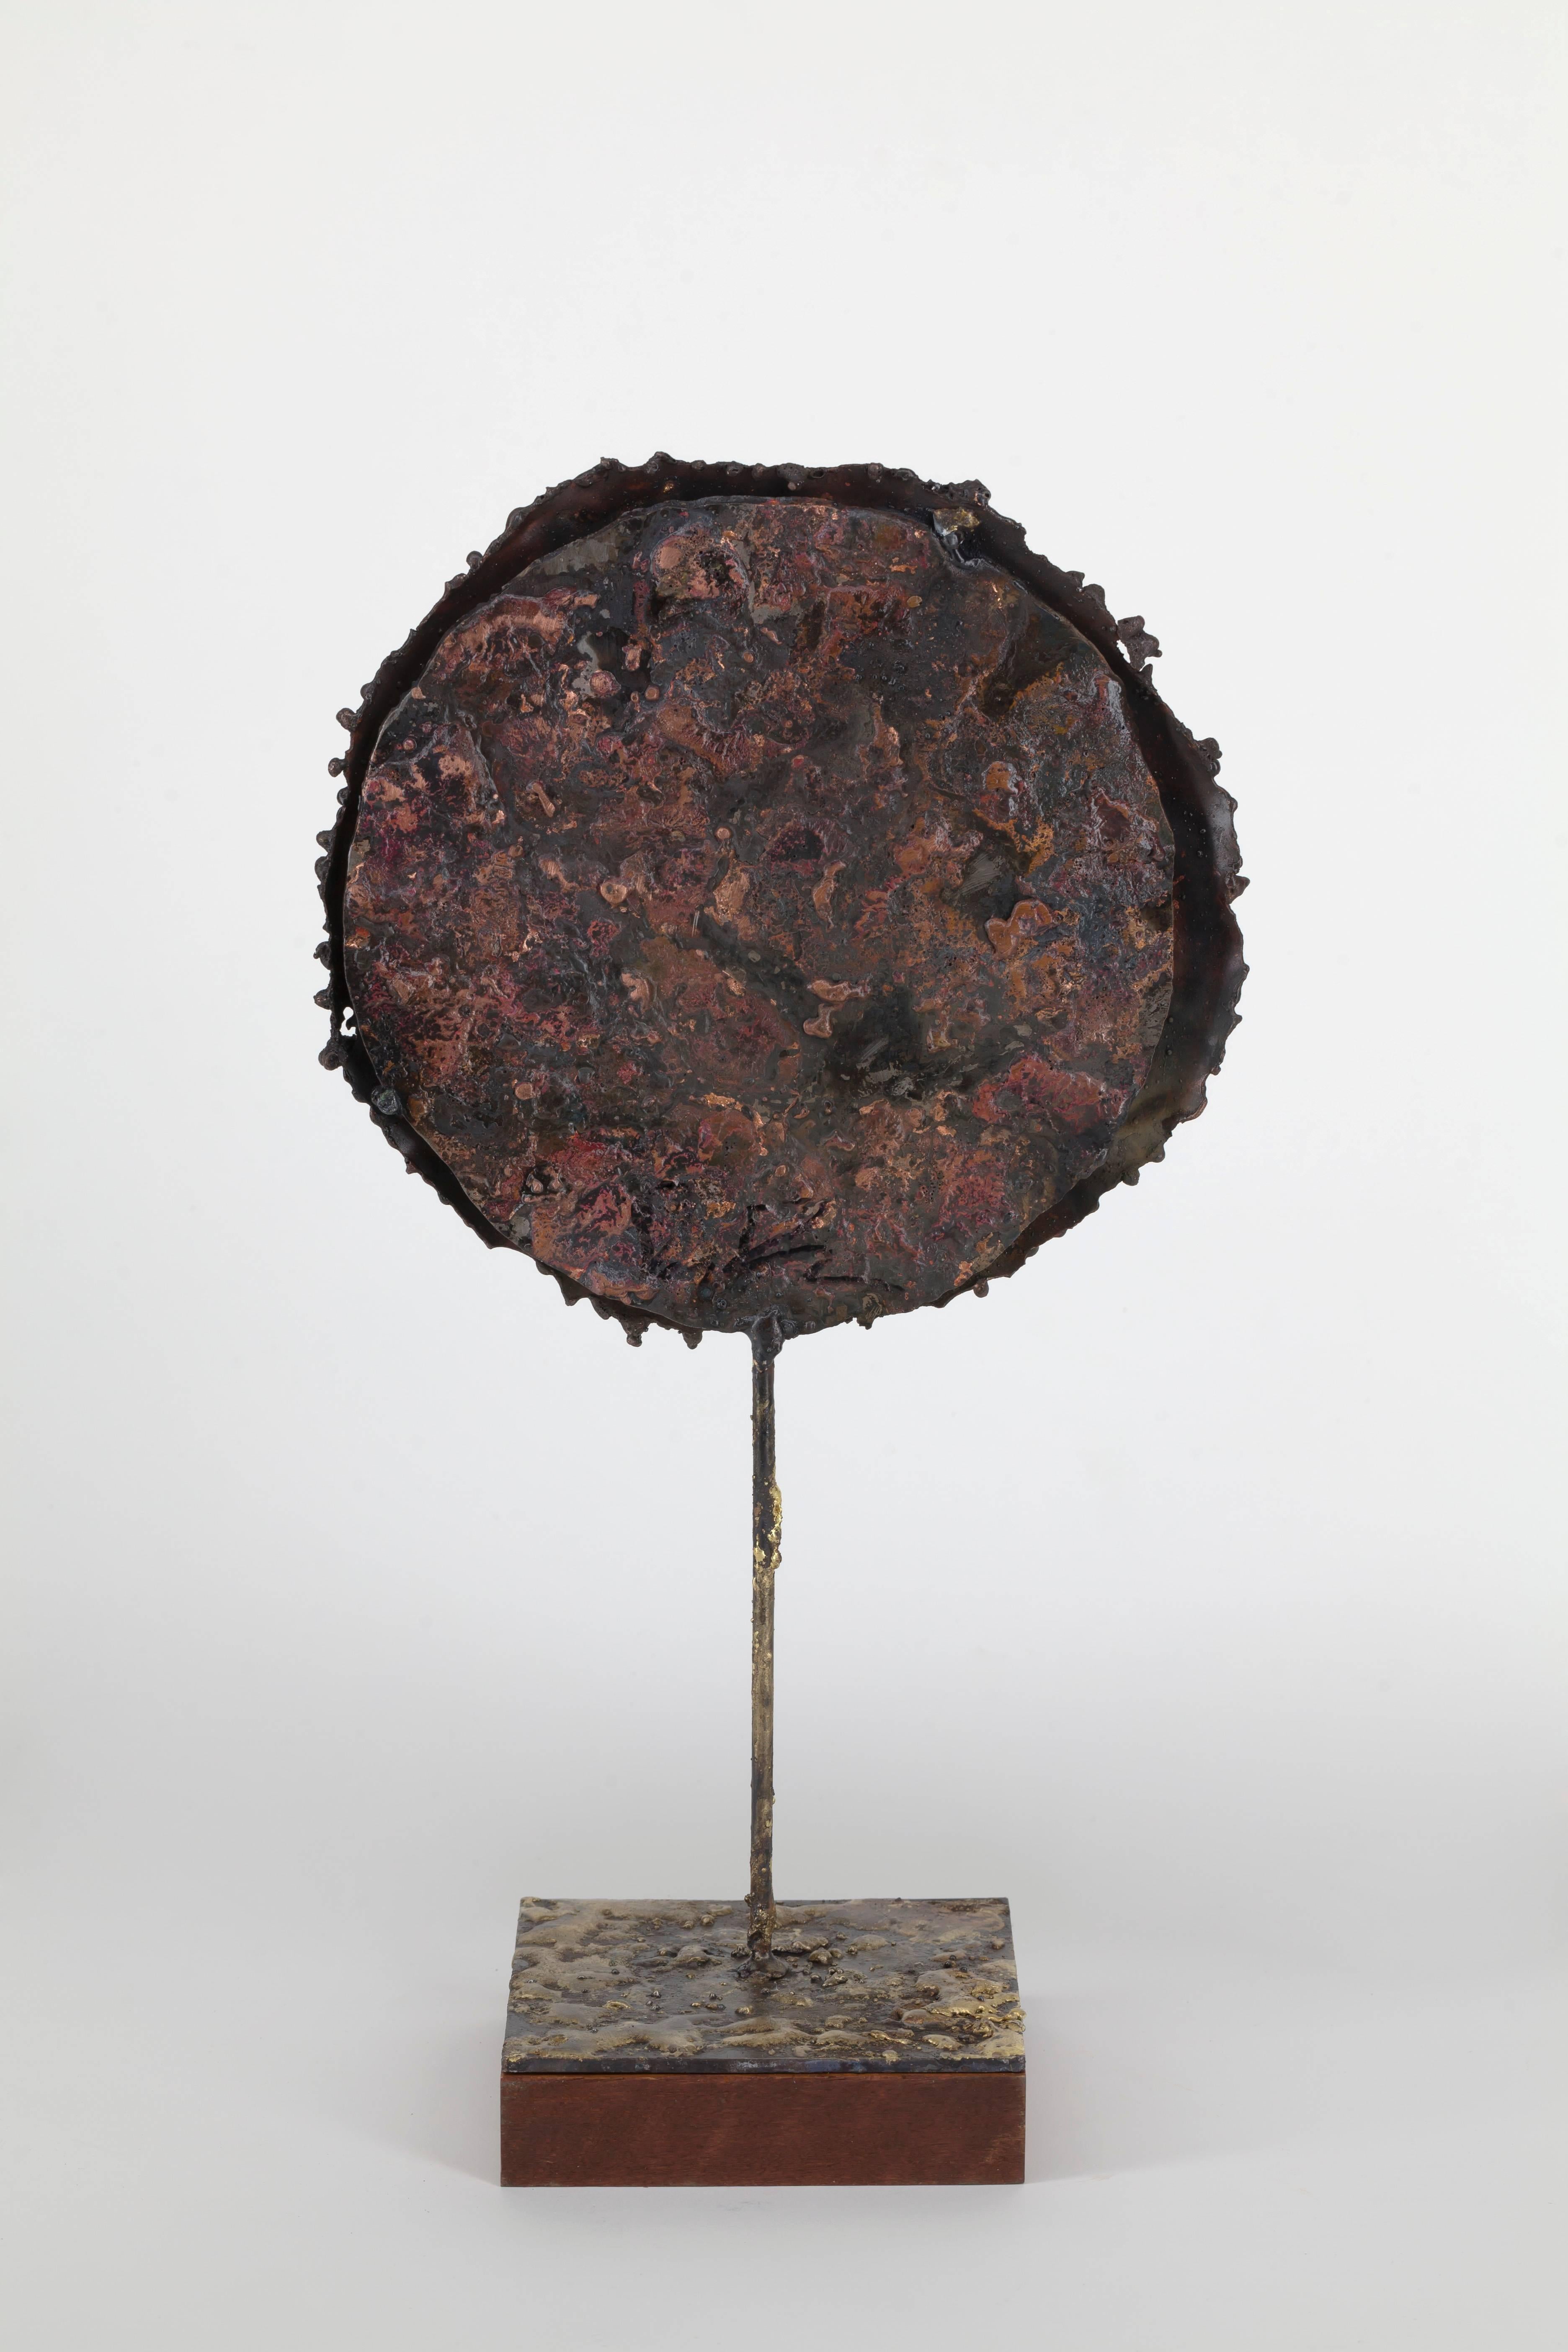 Original sculpture by James Anthony Bearden. Lunar bloom series tabletop mirror made from torch-cut steel and copper.